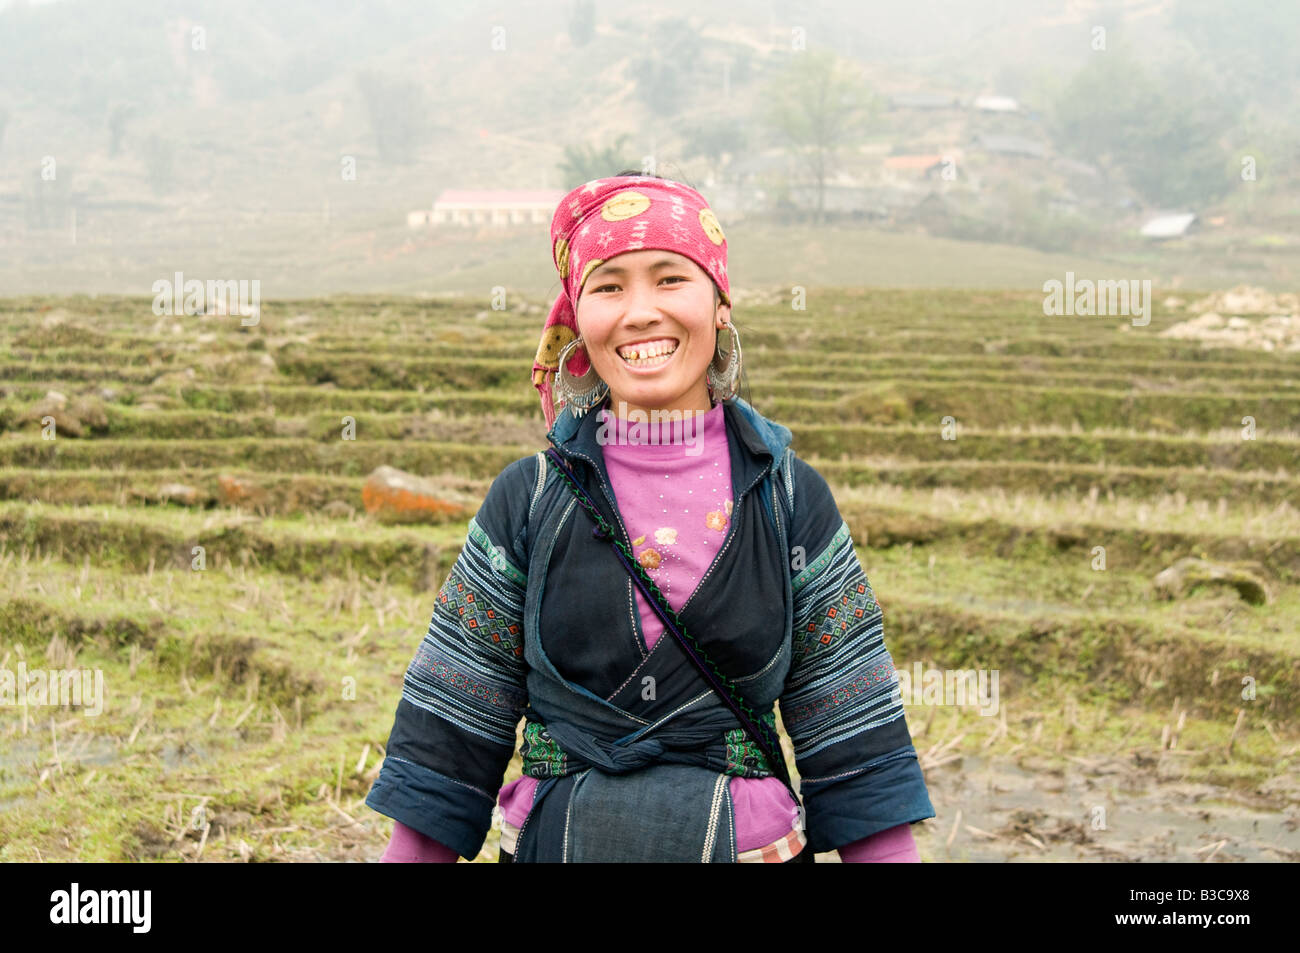 a happy smiling Hmong girl in the mountains surrounding Sapa Vietnam Stock Photo